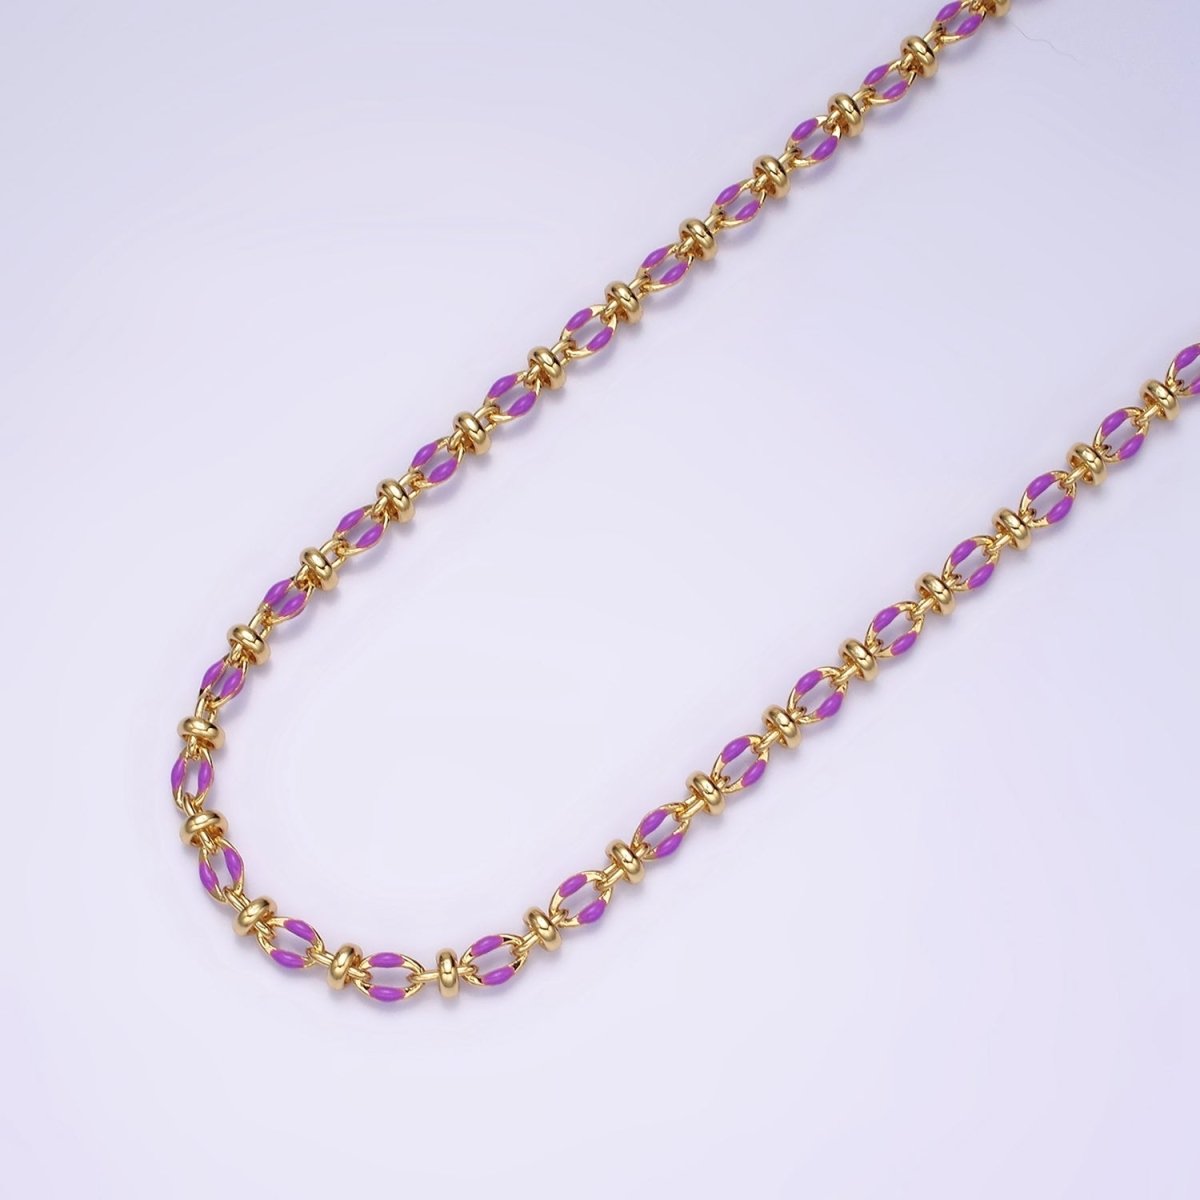 14K Gold Filled 3.8mm Multicolor Rainbow Enamel Crimp Double Link Unfinished Chain For Jewelry Making | ROLL-1394 1395 1396 1397 1398 1399 1400 1401 1402 1403 Clearance Pricing - DLUXCA